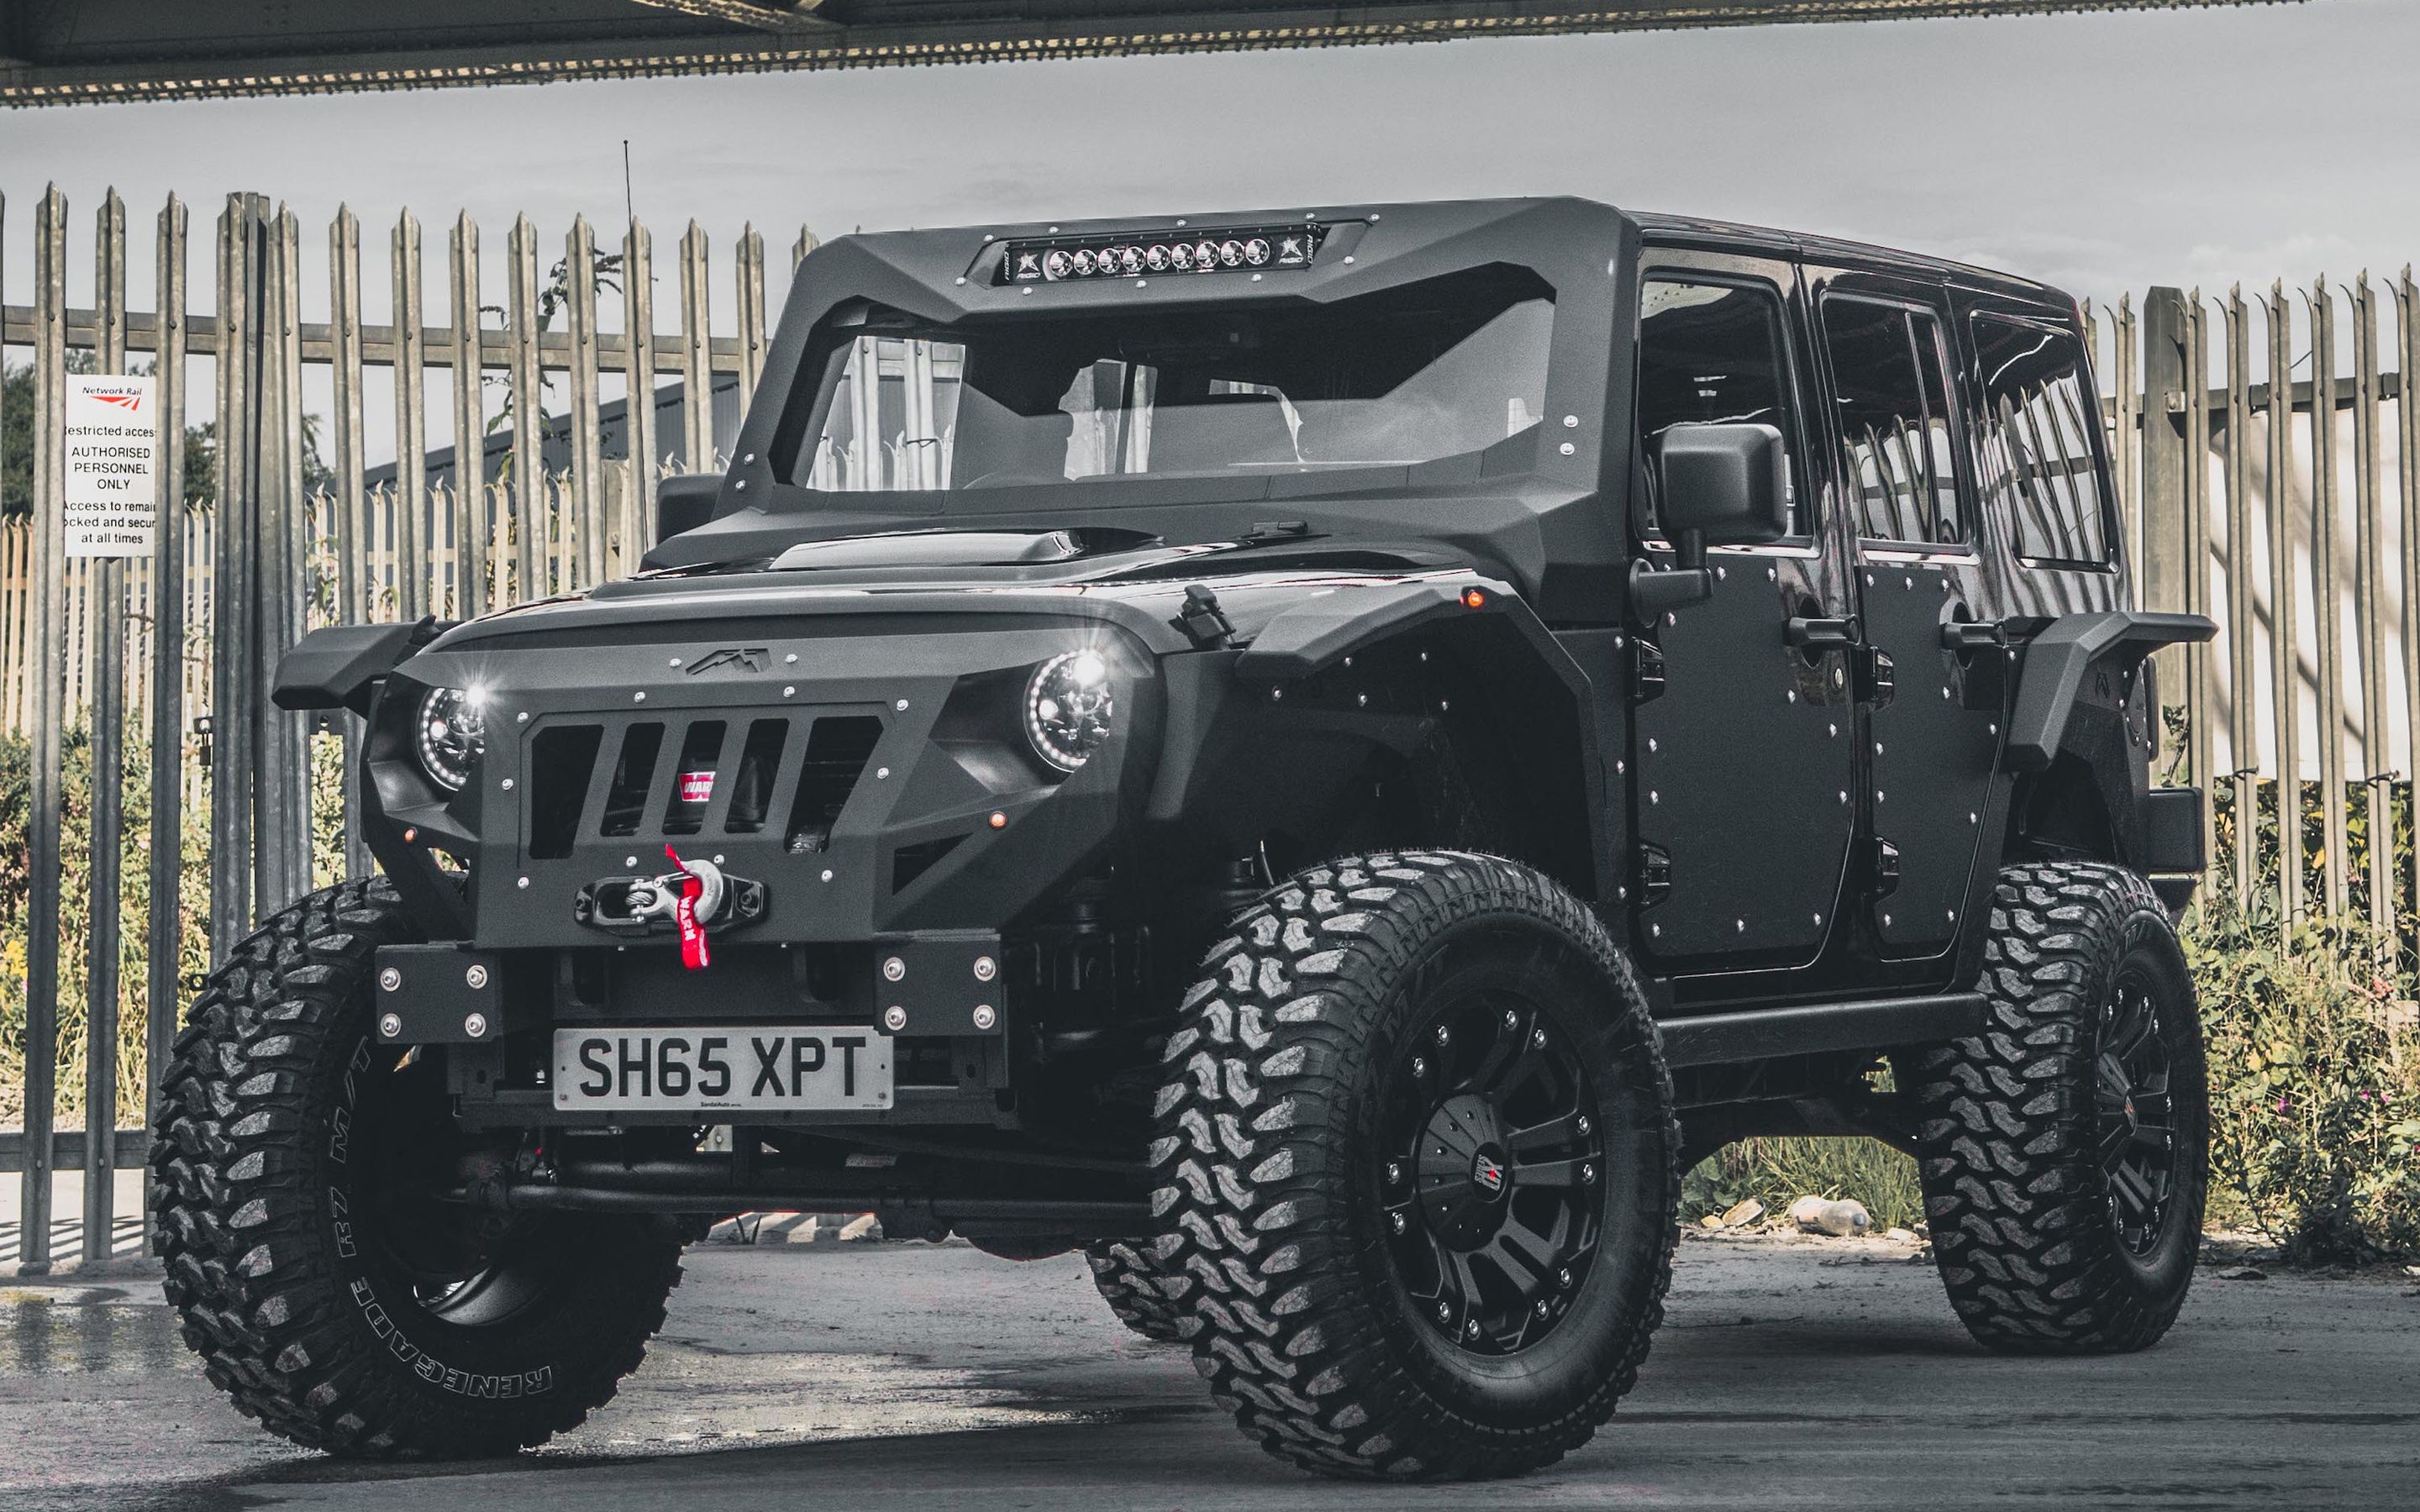 2880x1800 Download Wallpaper Jeep Wrangler Black Edition Suvs 2022 Cars Tunned Wrangler Jeep For Desktop With Resolution 2880x1800 High Quality Hd Picture Wallpaper